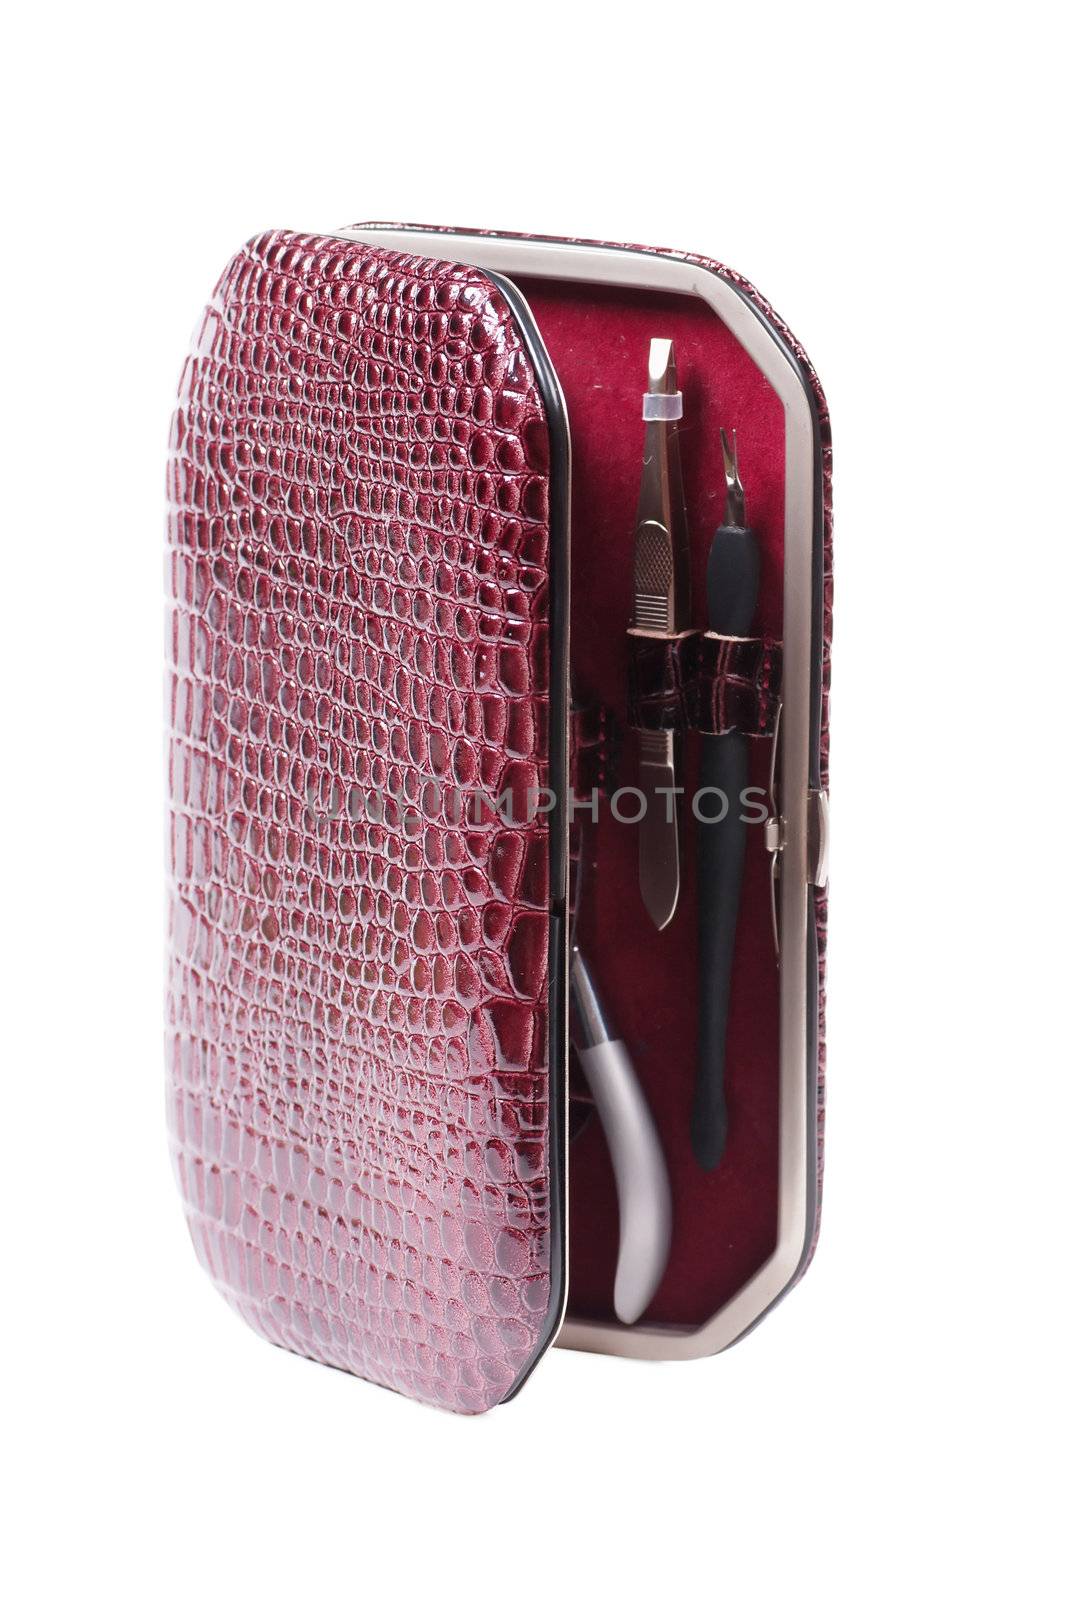 Leather box with manicure set isolated over white